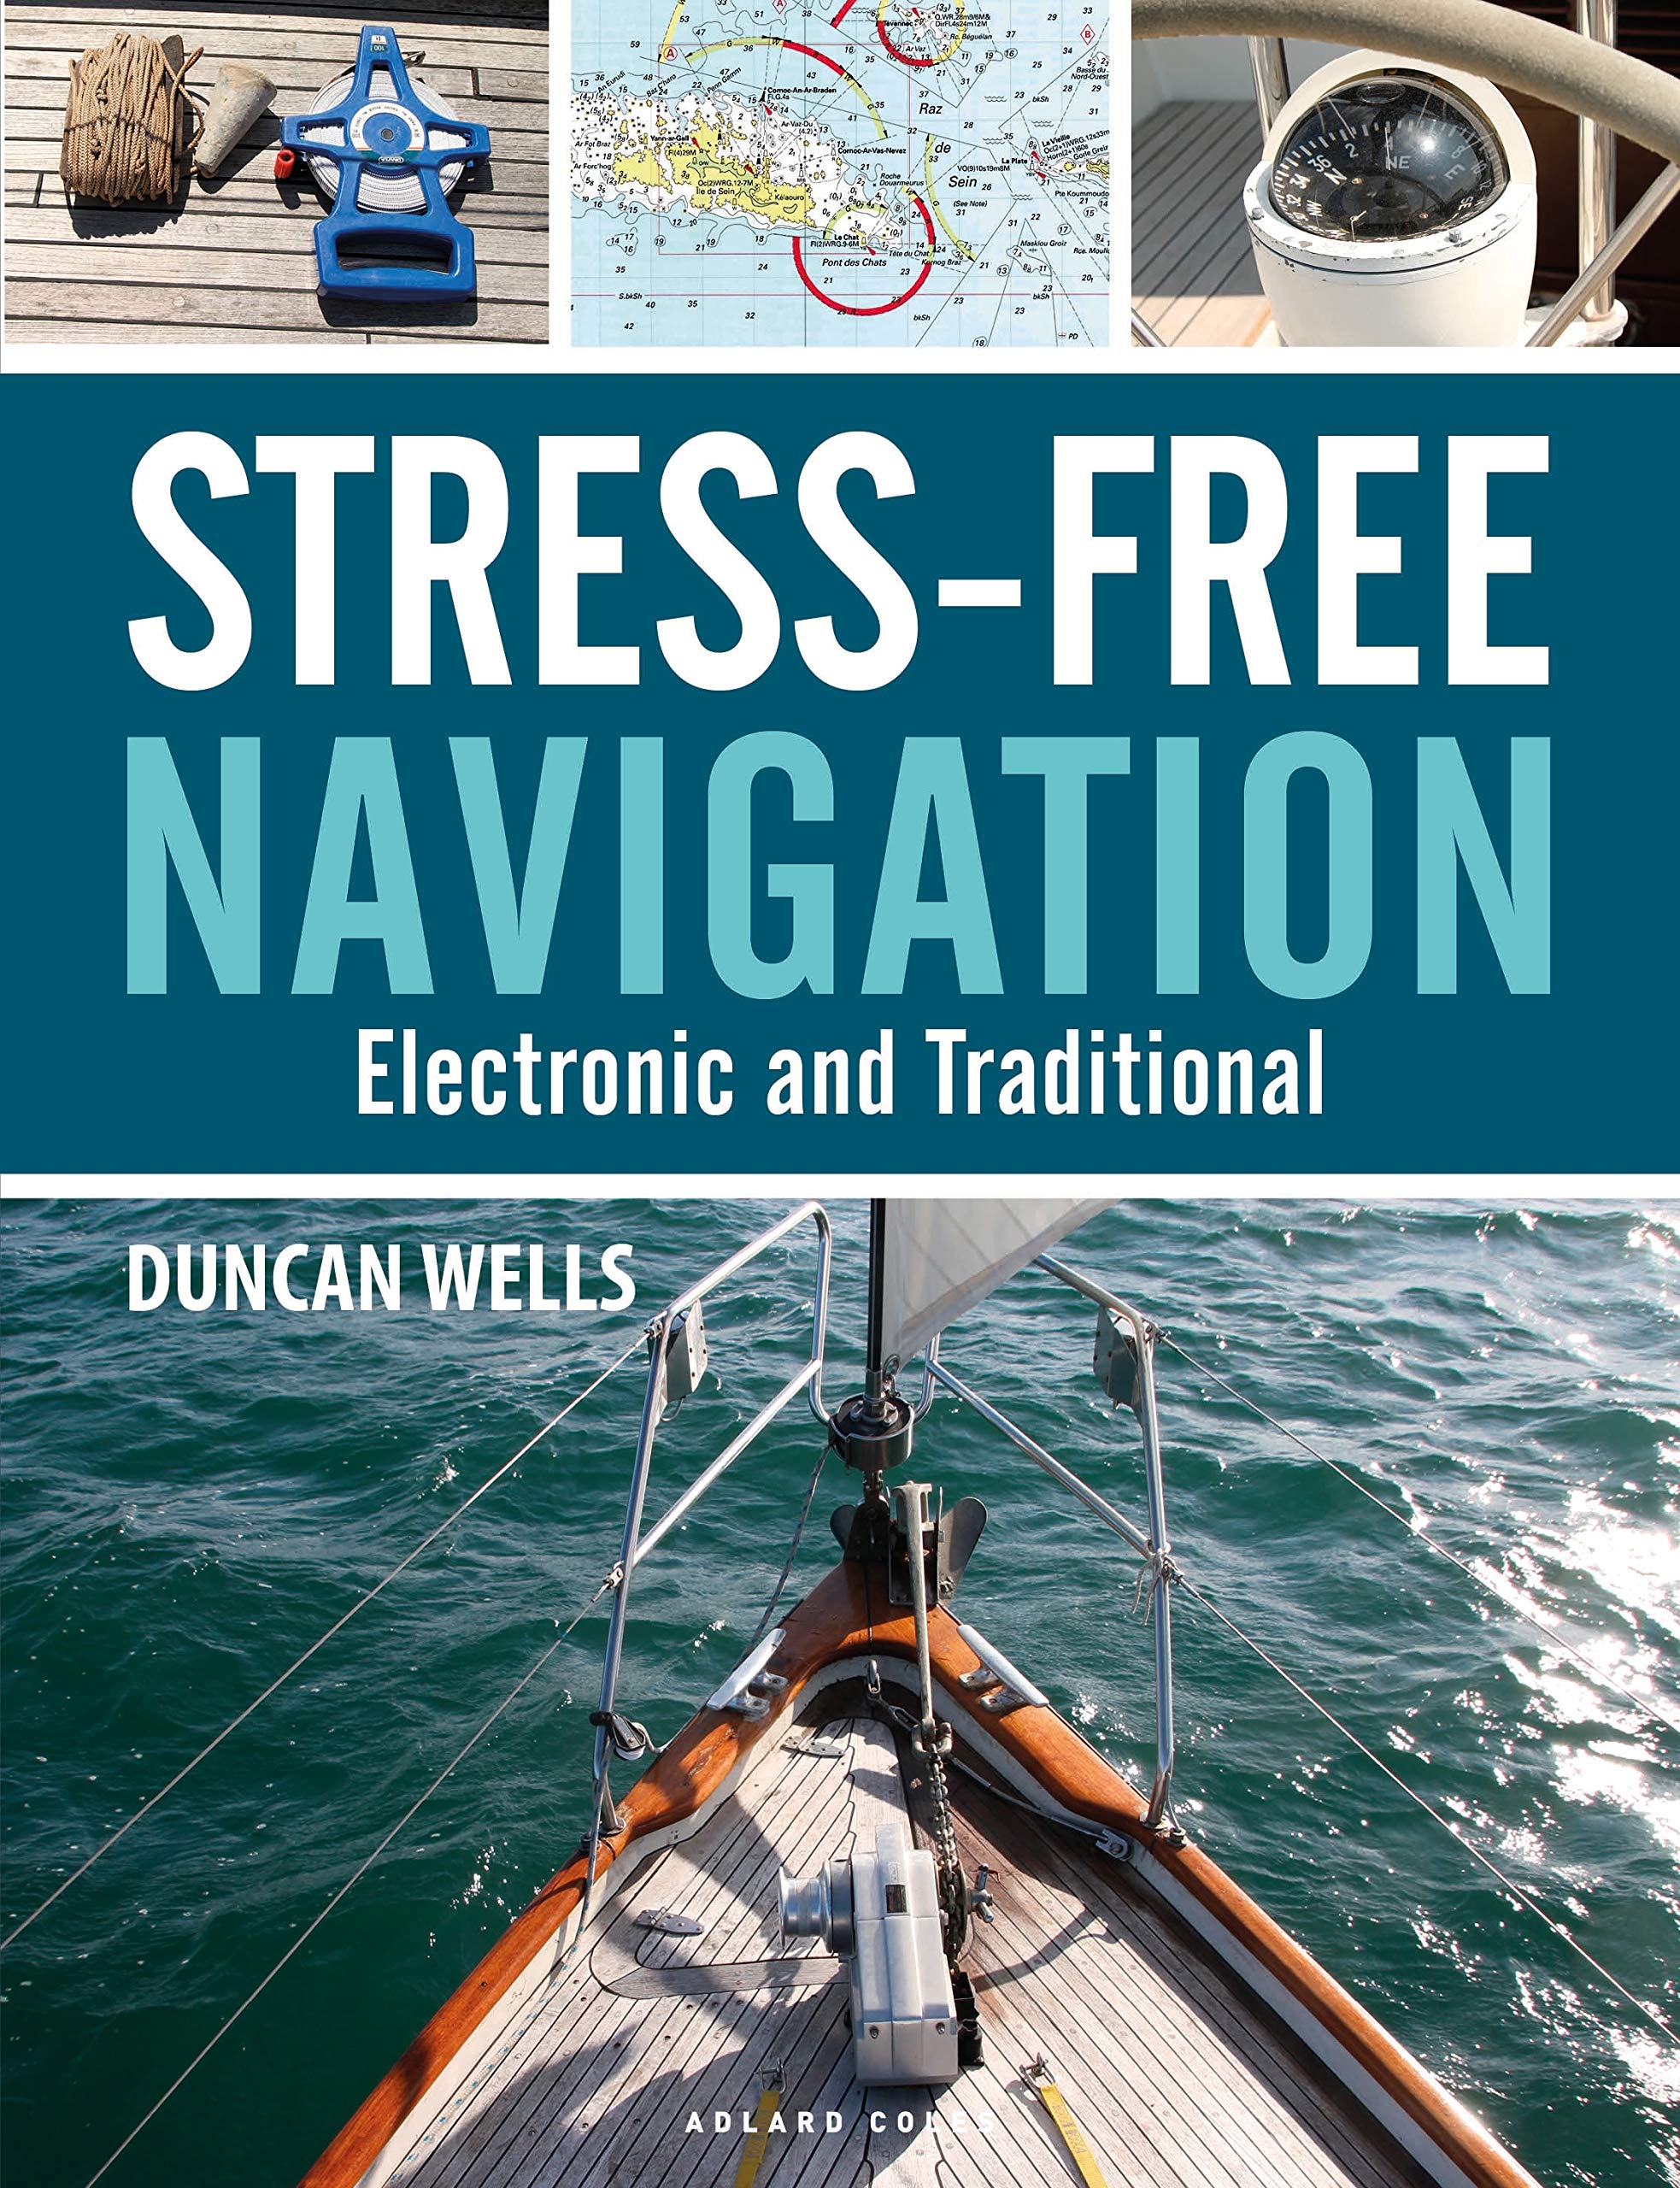 Stress Free Navigation: Electronic and Traditional